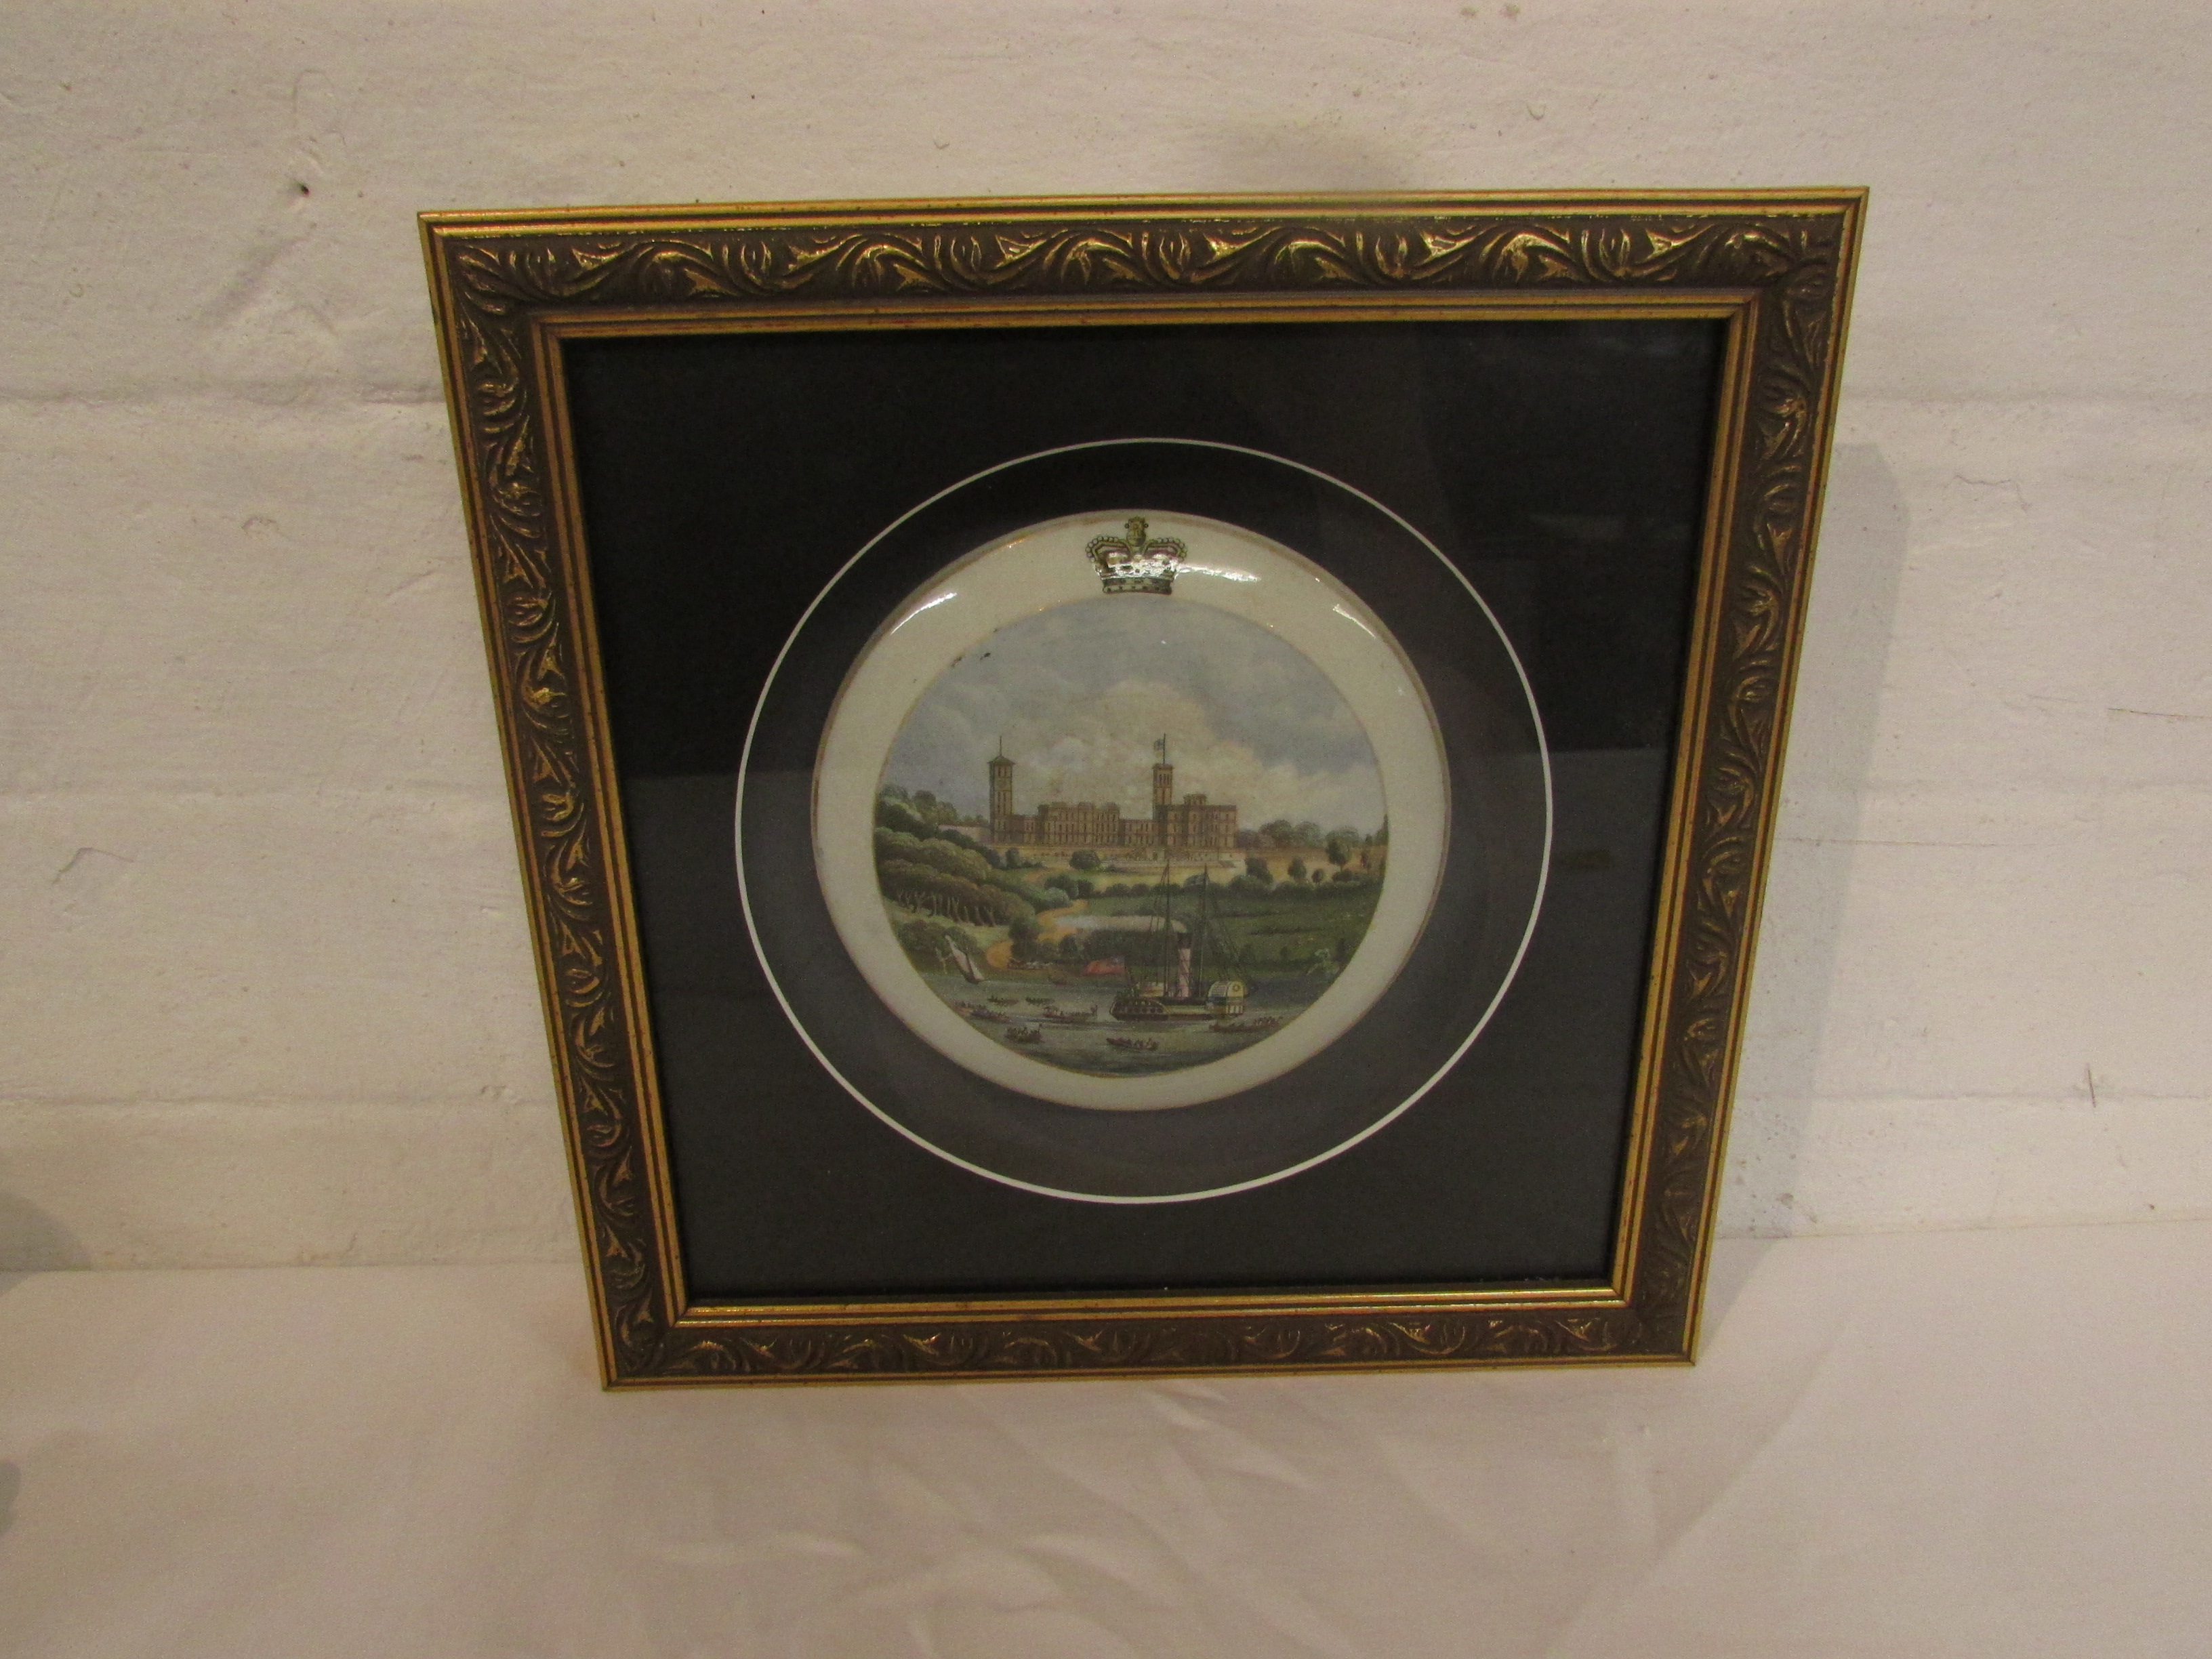 A Pratt pot lid showing Royal Palace with paddle steamer to foreground with crown to the rim set - Image 5 of 11